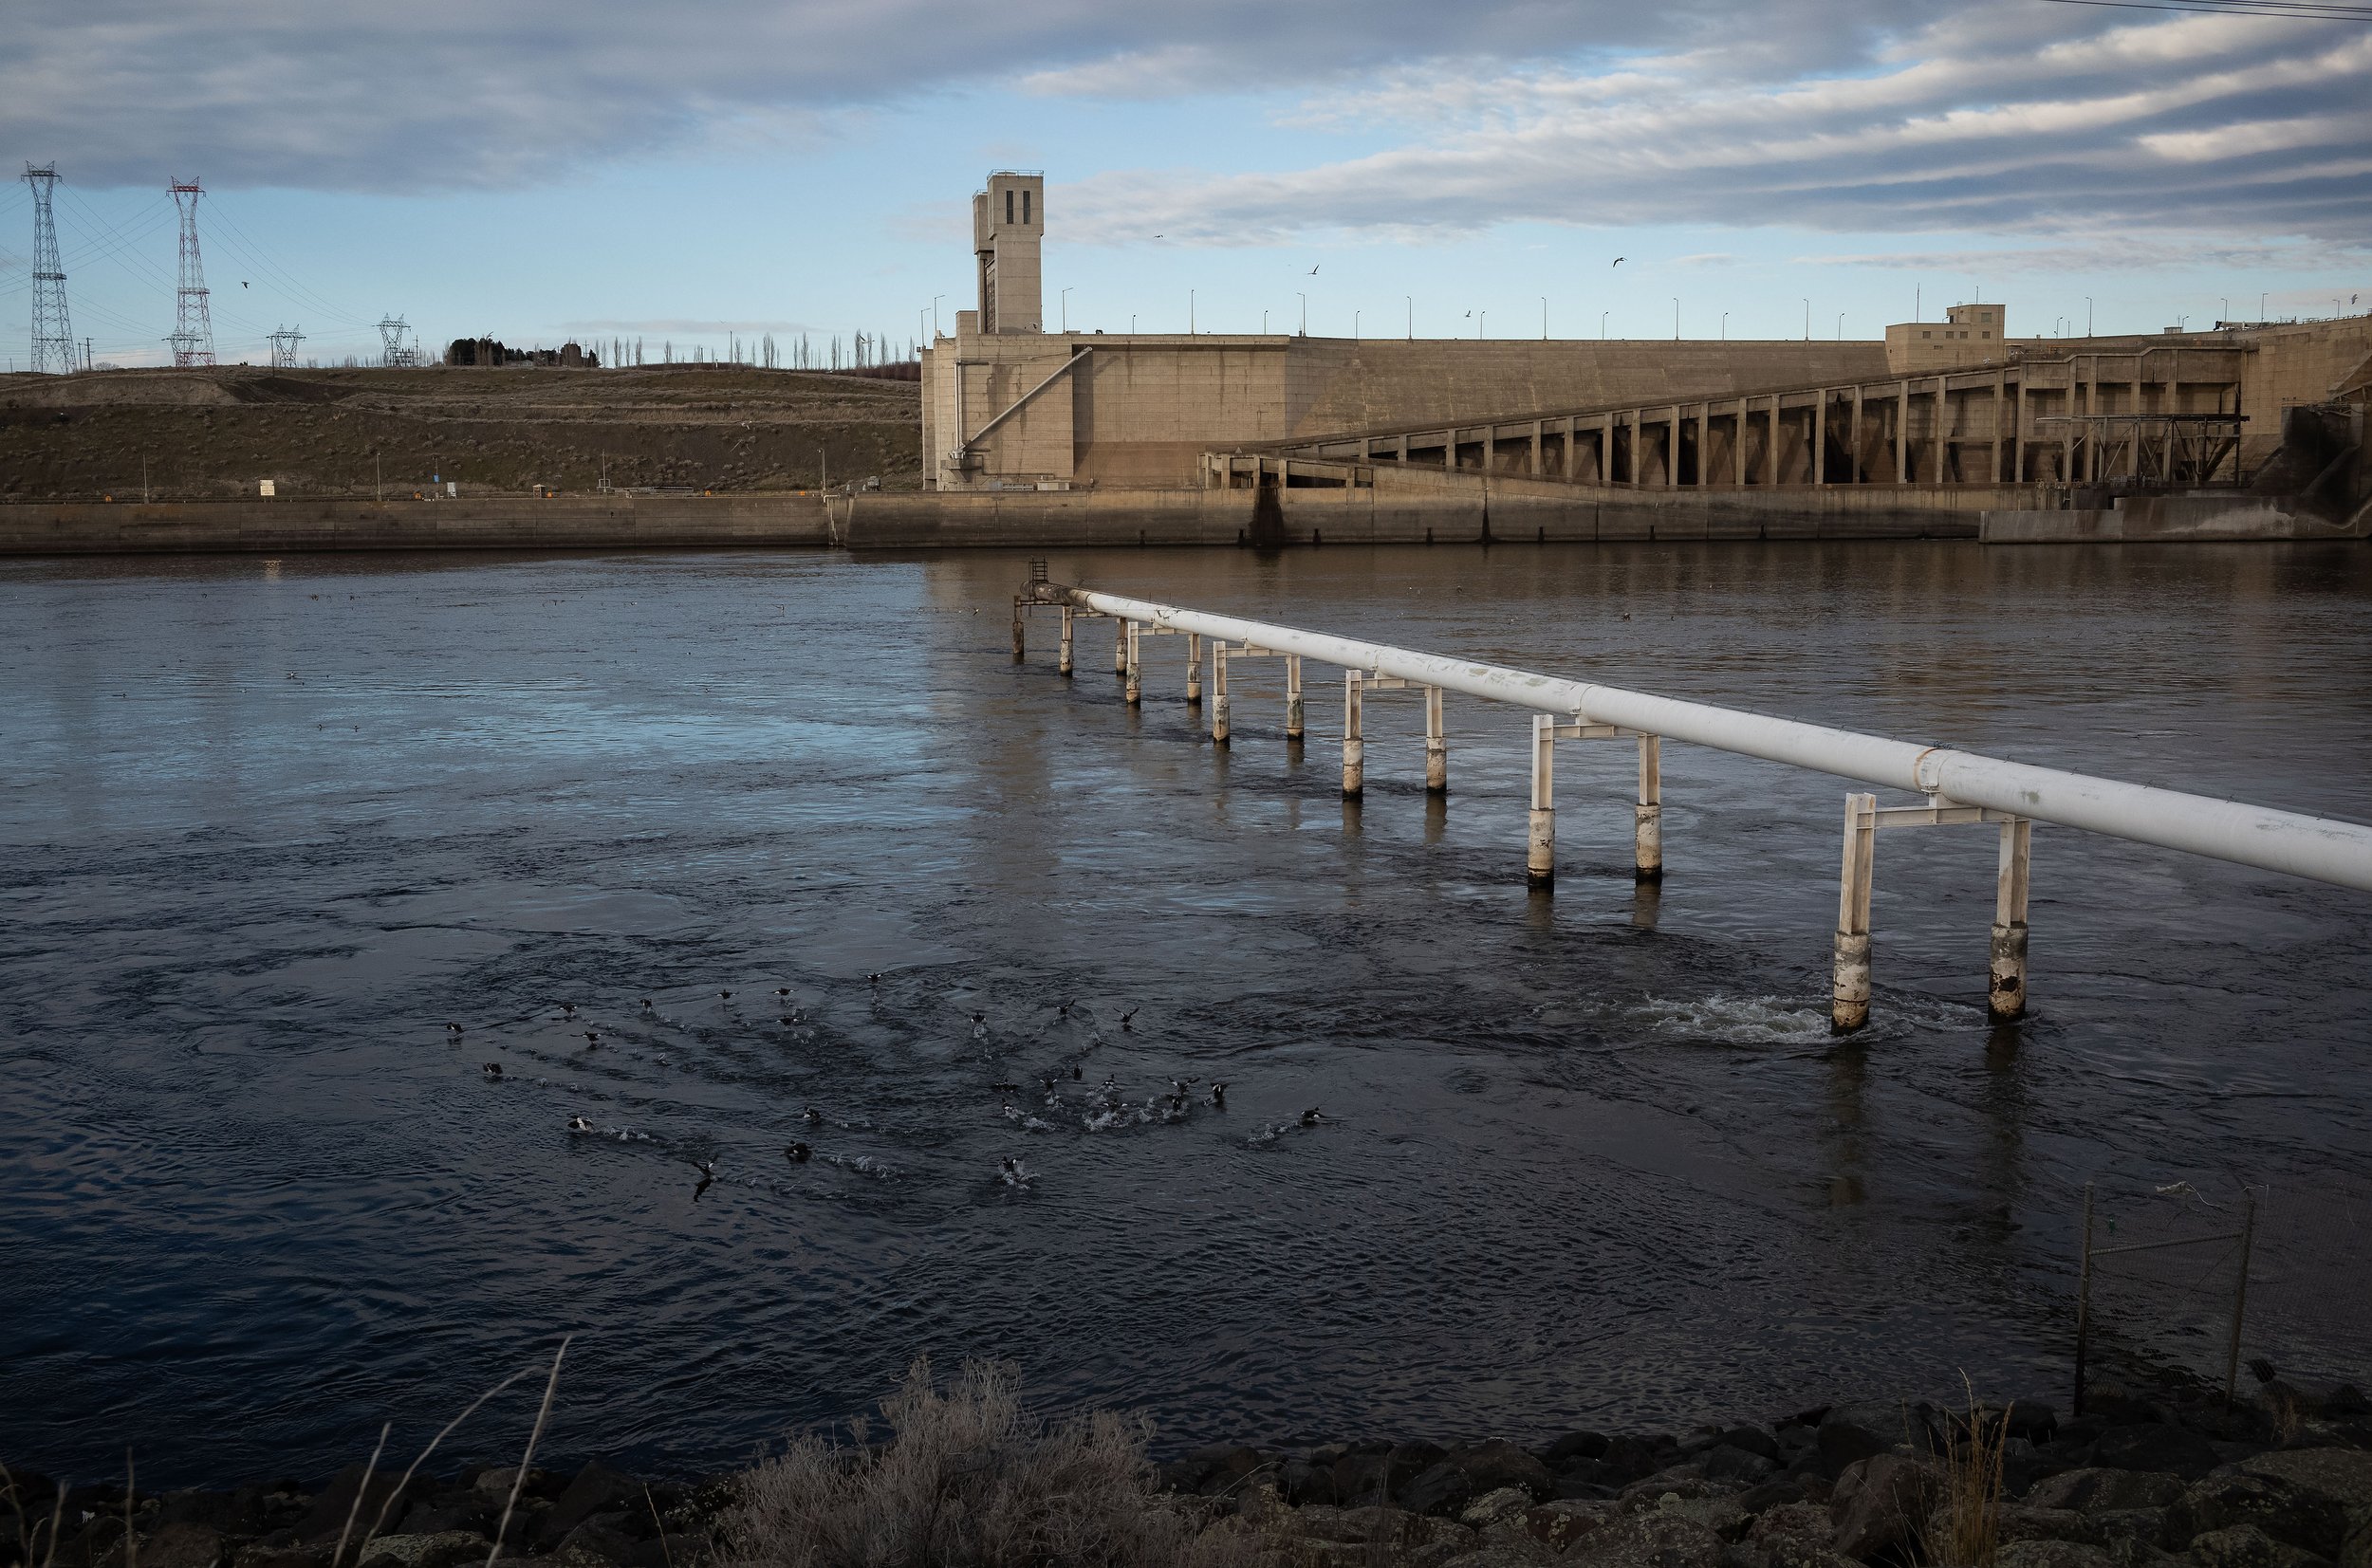  The Ice Harbor Dam and fish ladder on the Snake River in Washington State, USA, seen on December 19, 2021, is being considered for removal. 